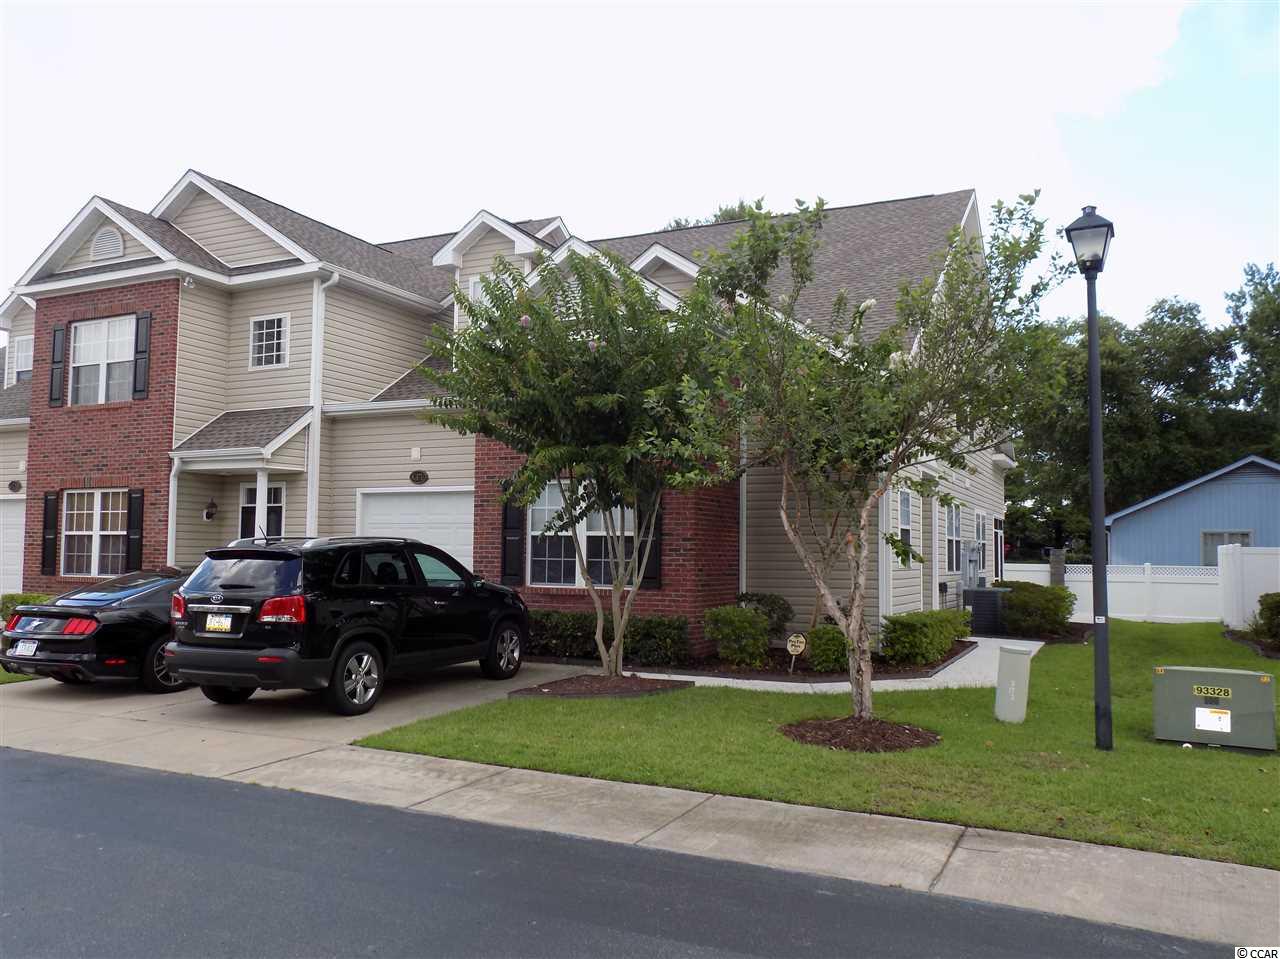 4376 Willoughby Ln. Myrtle Beach, SC 29577